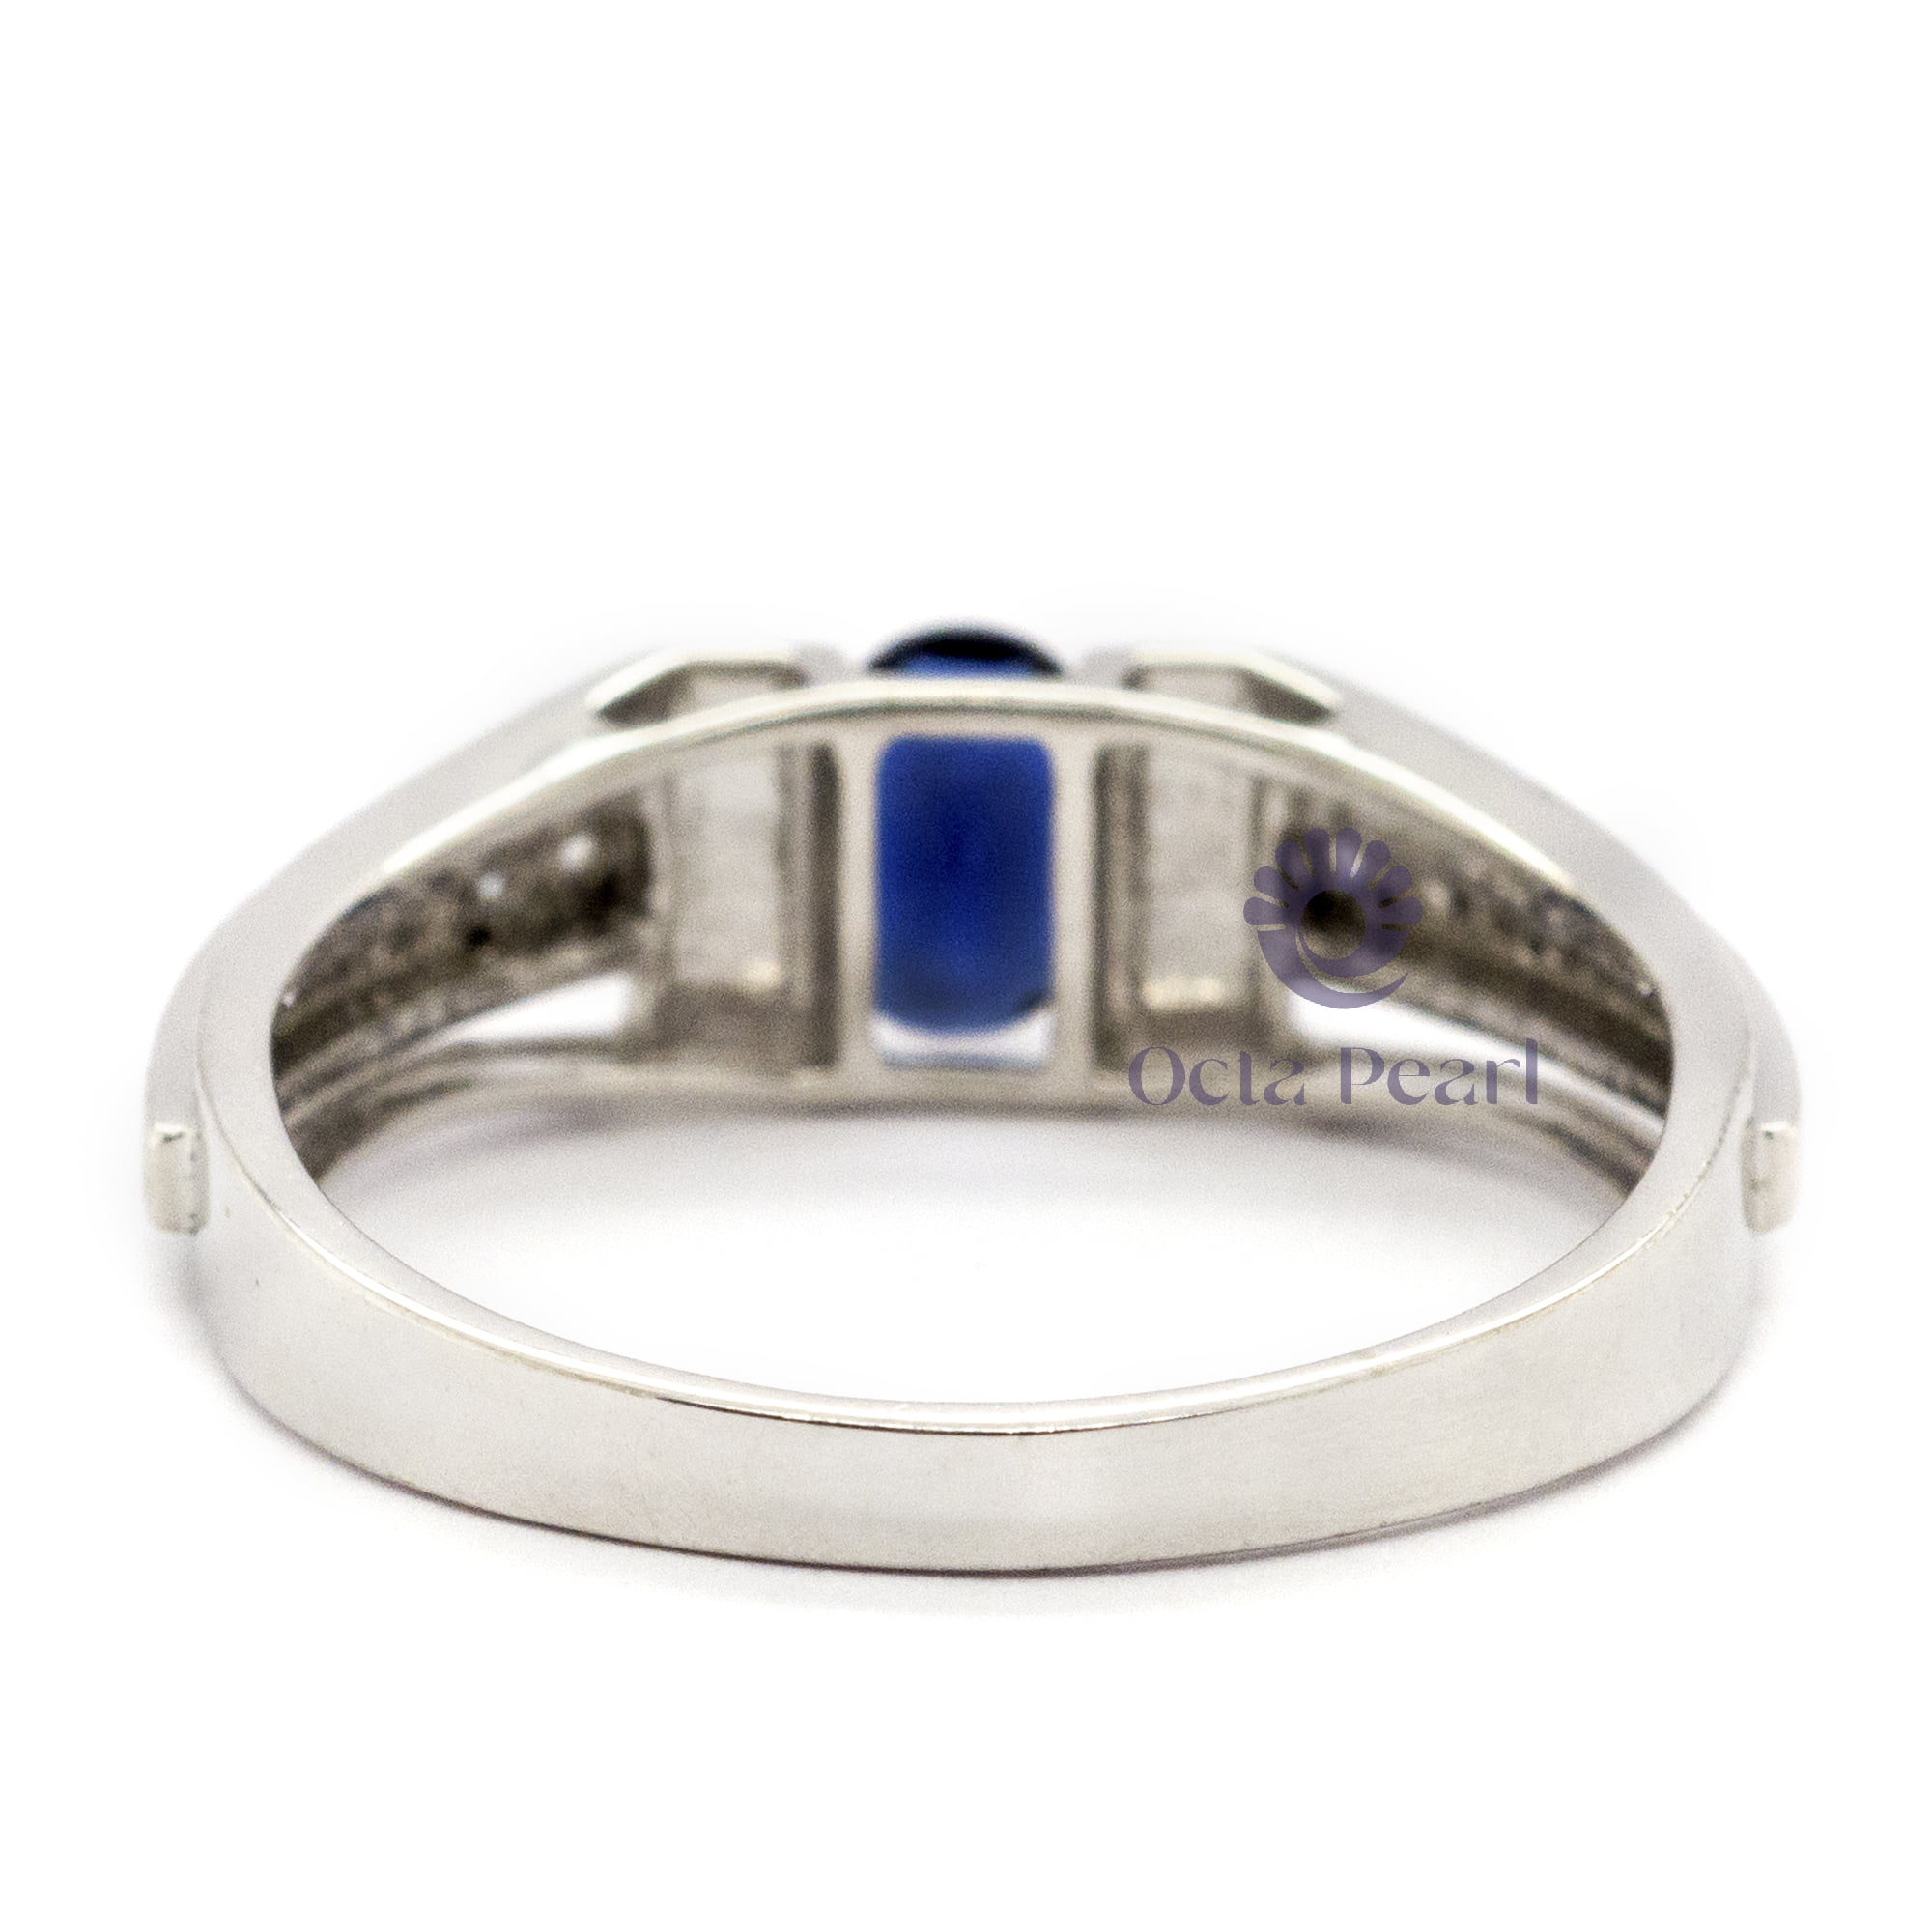 6.30X5.30 MM Tension Set Blue Sapphire Oval With CZ Round Stone Men's Ring Father's Day Gift